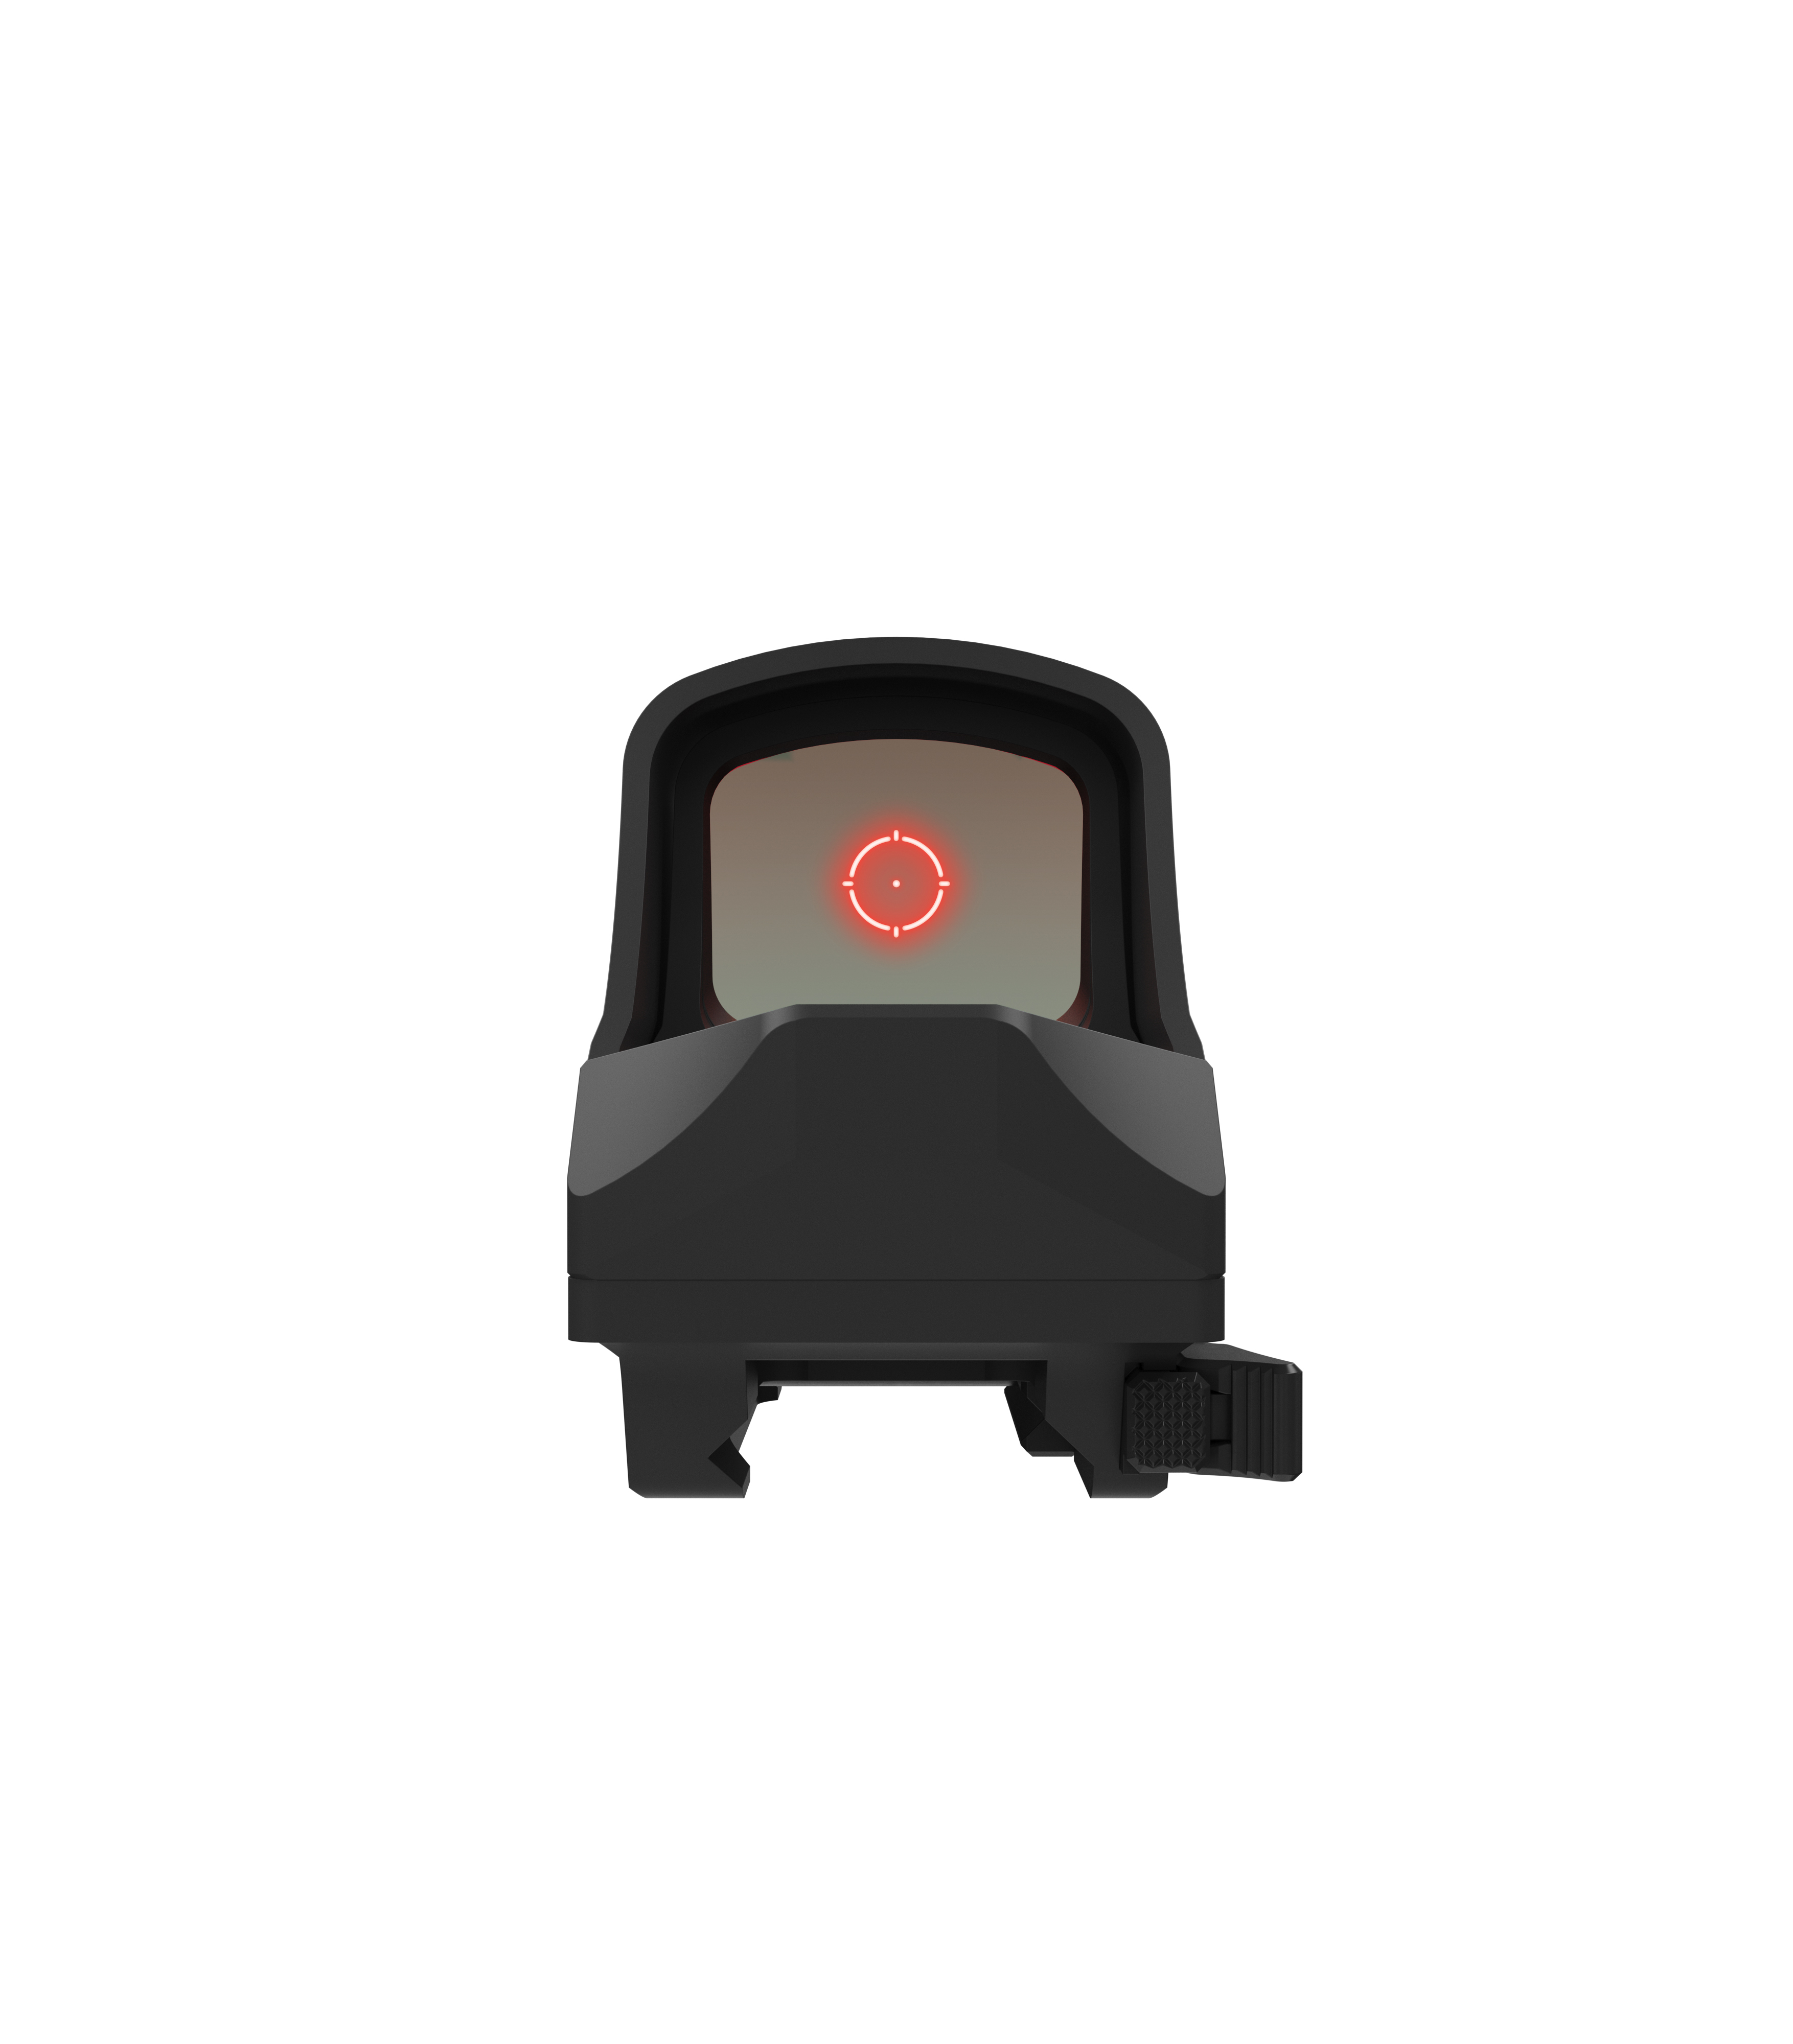 Holosun HS510C open reflex red dot sight with switchable 2MOA dot, 65MOA circle dot reticle and sol…